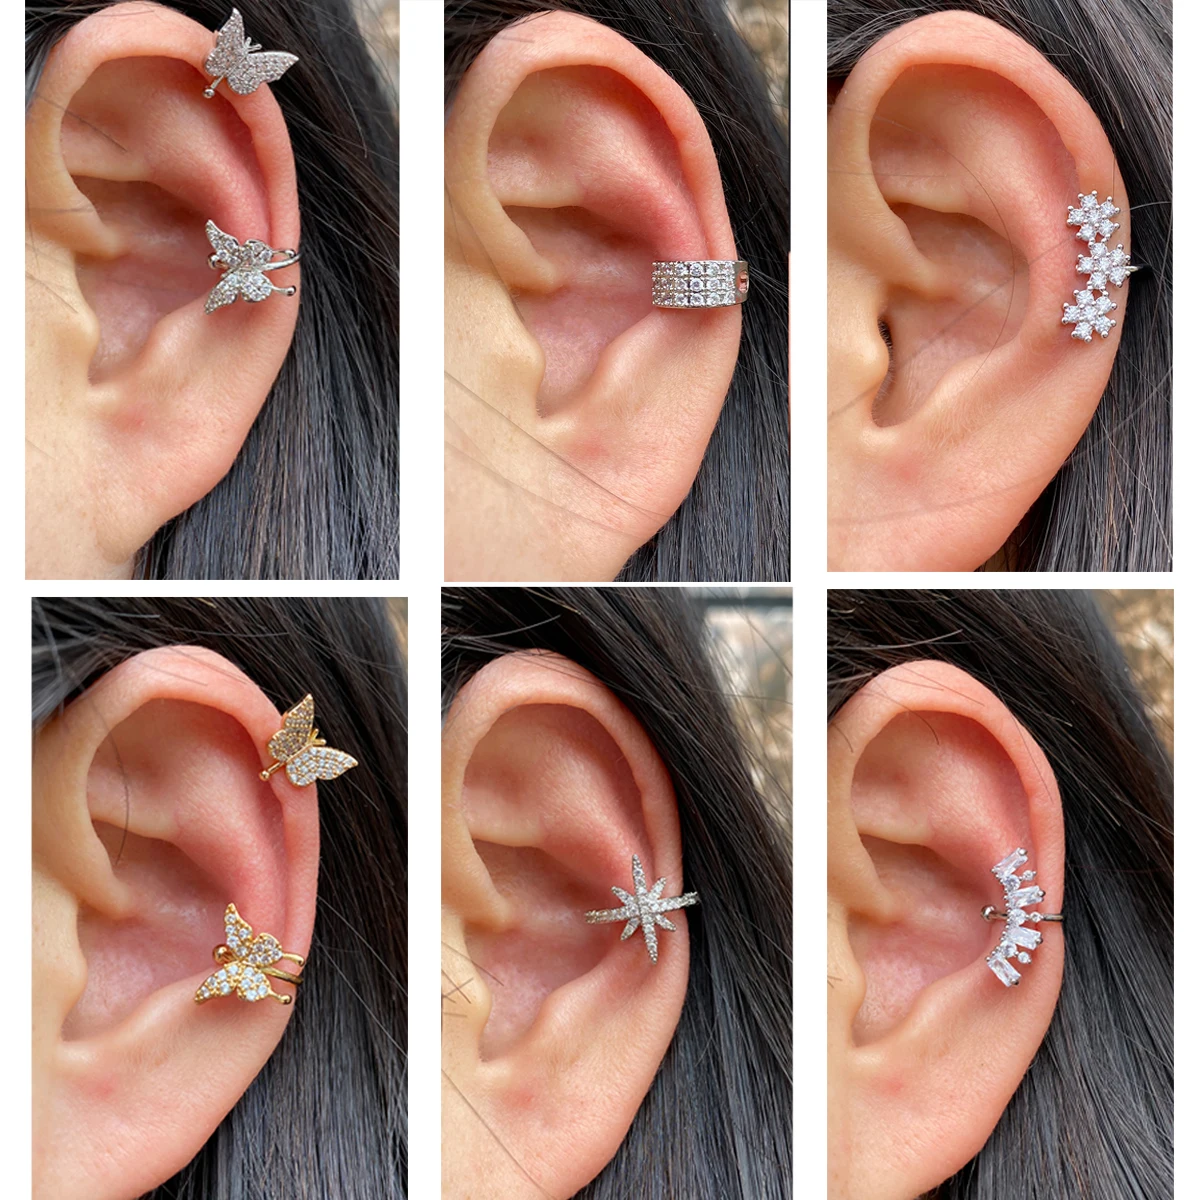 Ear Clip Earrings Without Piercing - 1pc Cartilage Fake Without Piercing  Ear Cuffs - Aliexpress